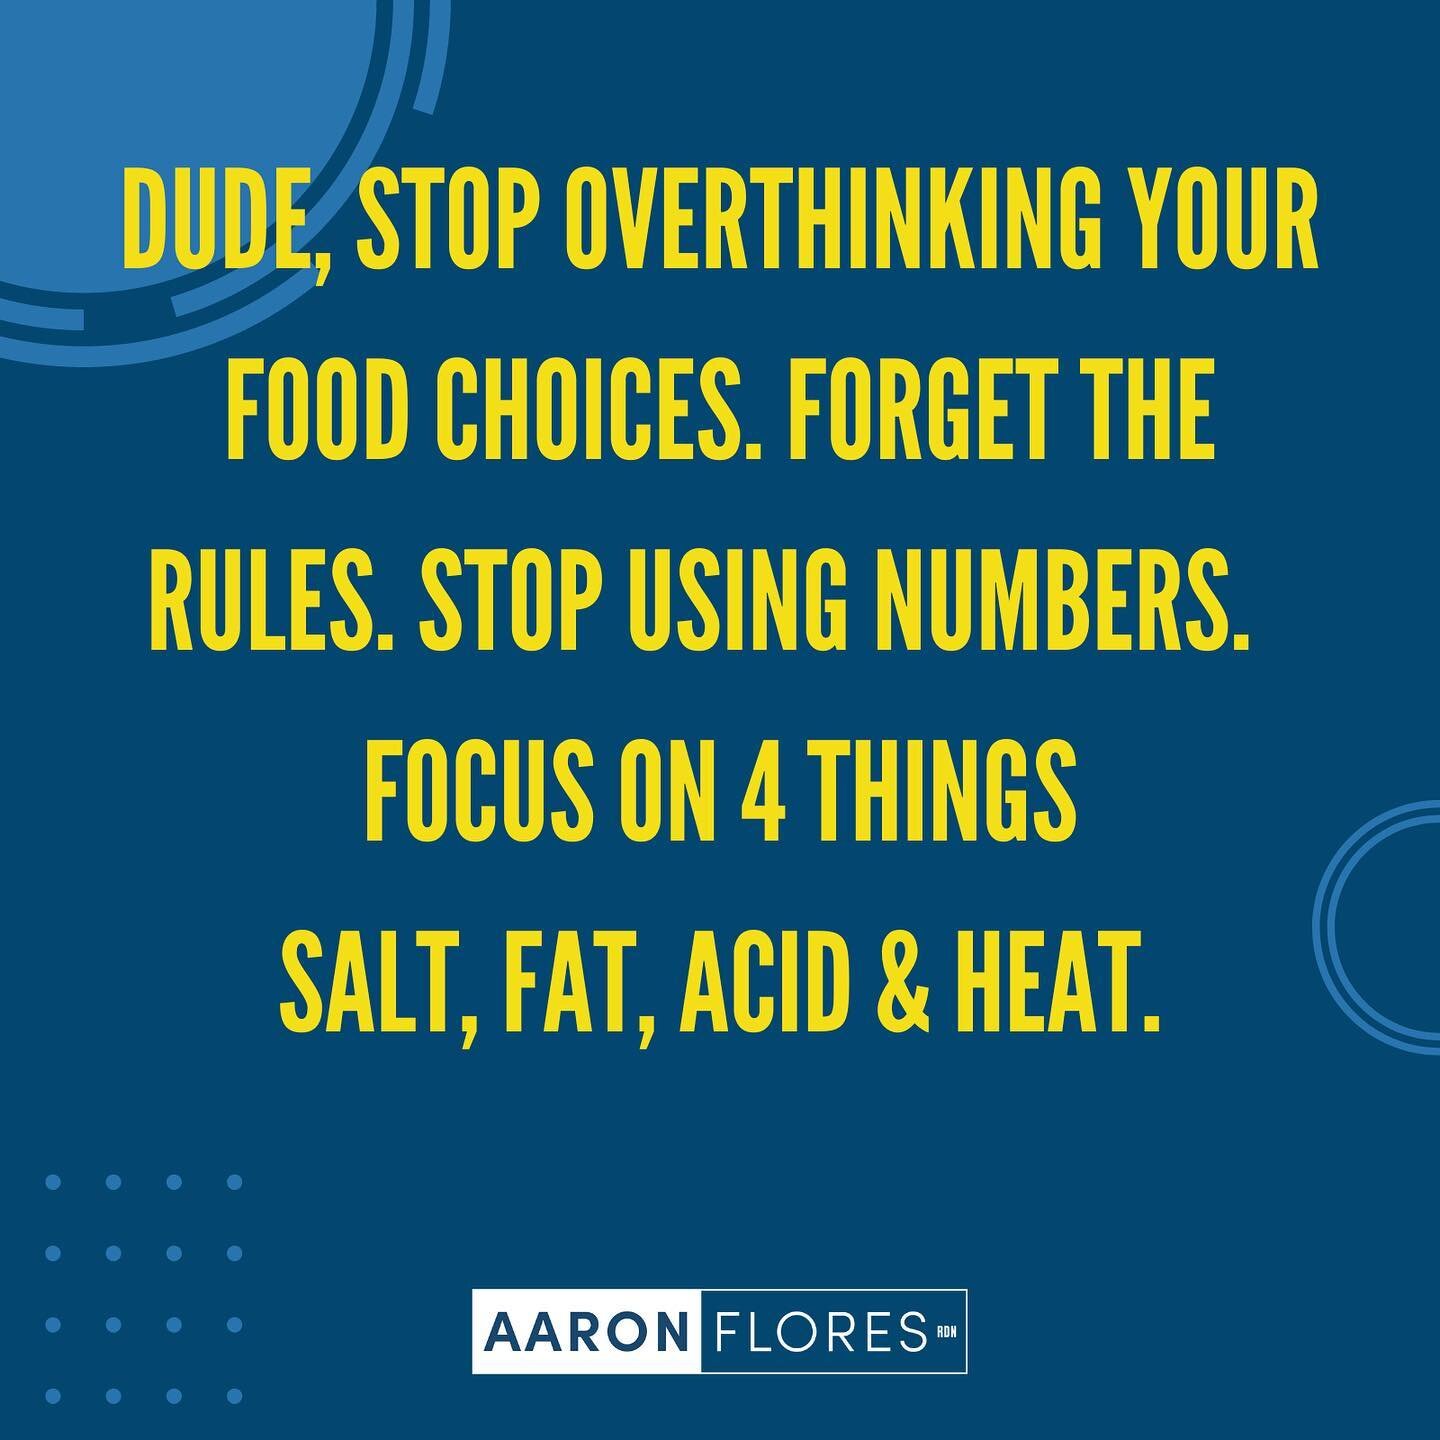 🚨Dude, stop overthinking your food choices. Forget the rules. Stop using numbers. Focus on 4 things; salt, fat, acid &amp; heat. 🚨 

If you're looking for a simple yet effective way to figure out what to eat without focusing on dieting or numbers, 